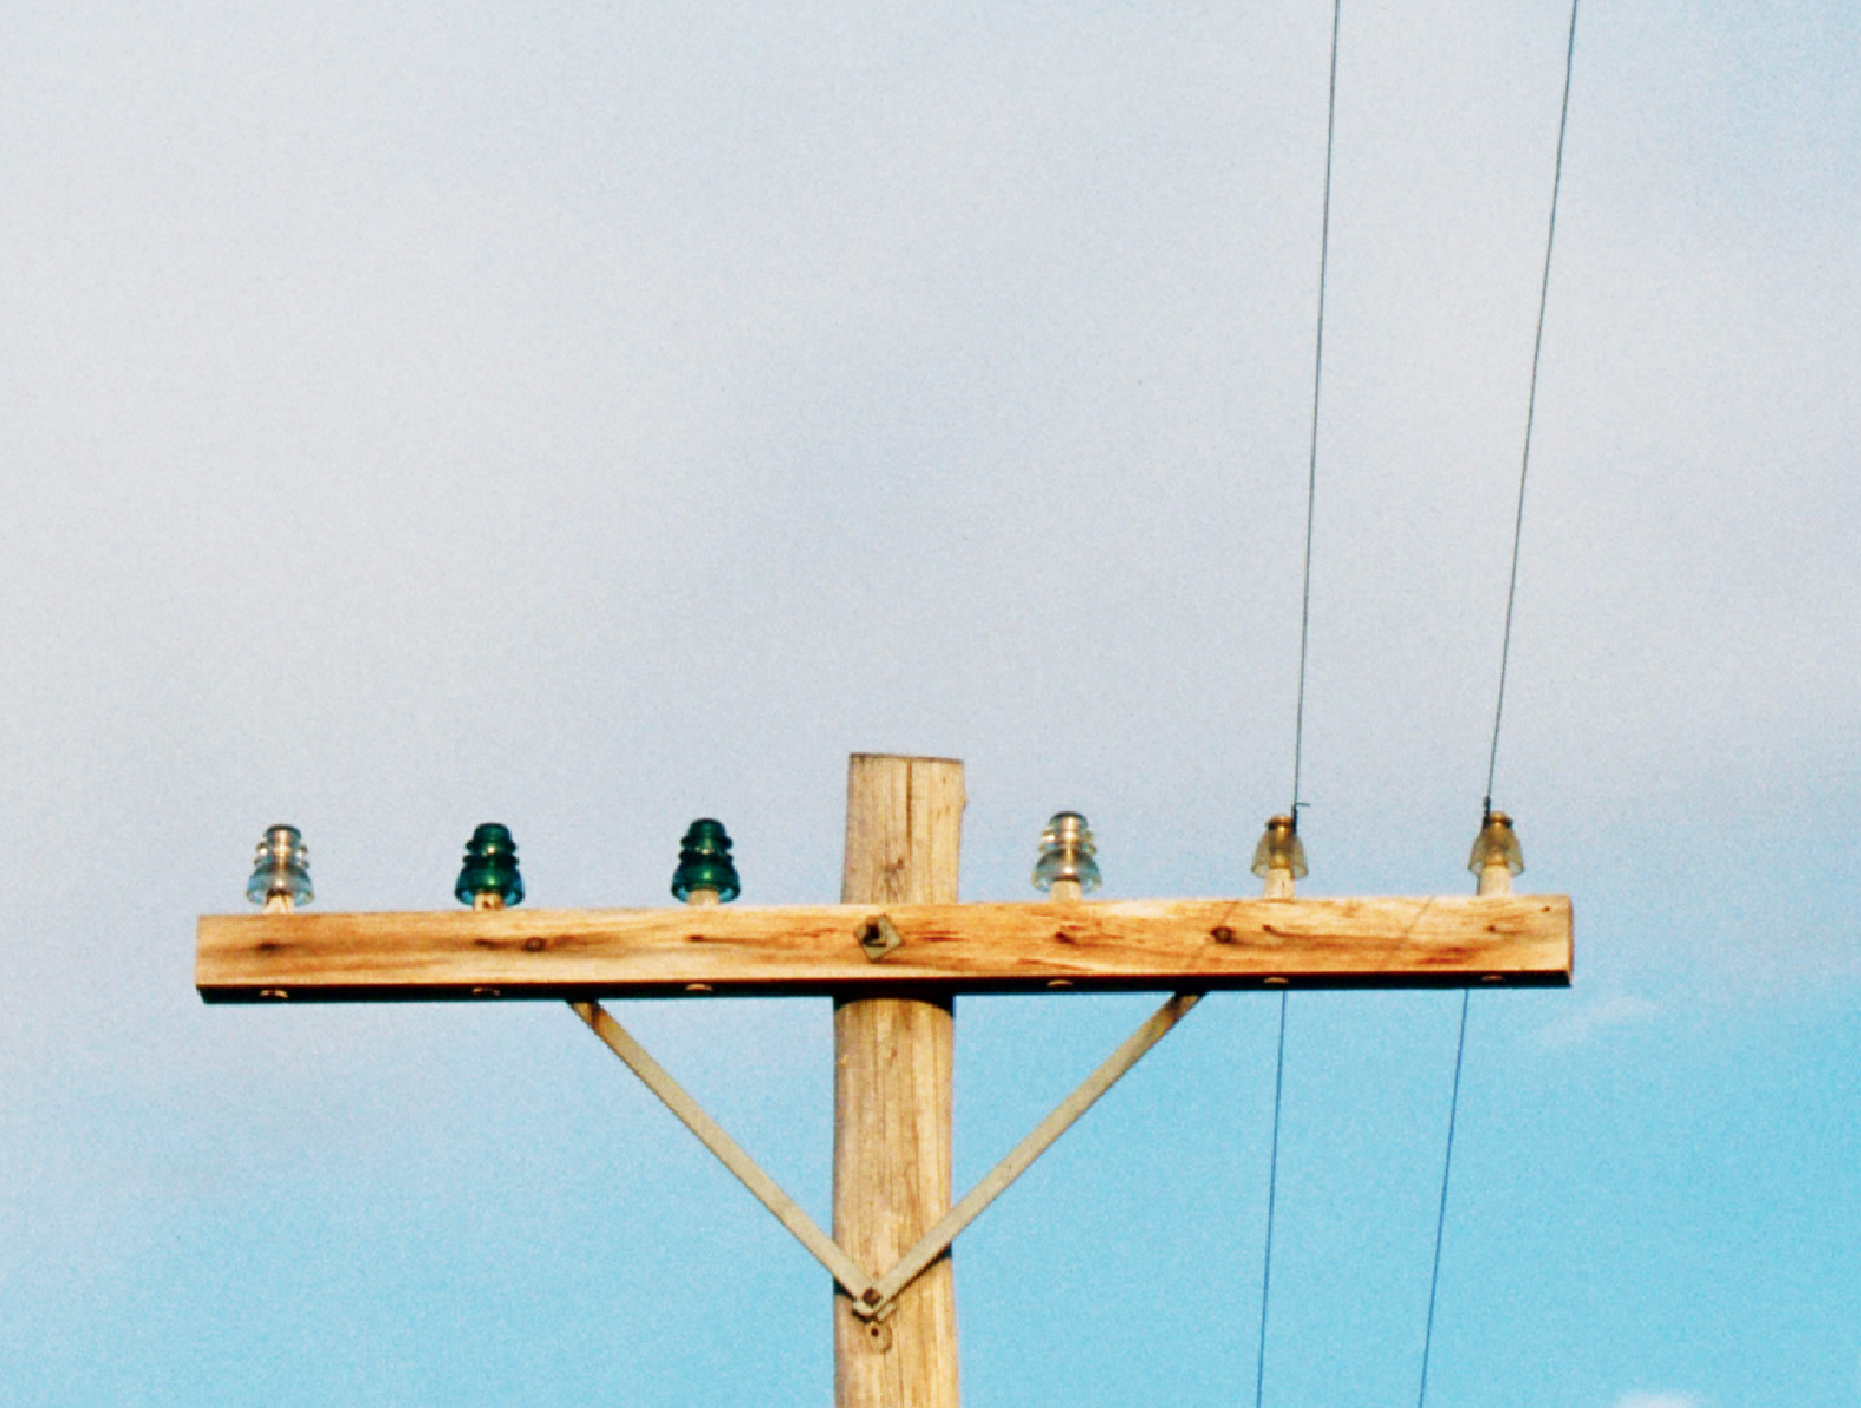 An image of a utility pole top with glass insulators. Many glass insulators were threadless and held in place with either tar or glue. Most have since been replaced by sturdier insulators made from porcelain or polymer composites.